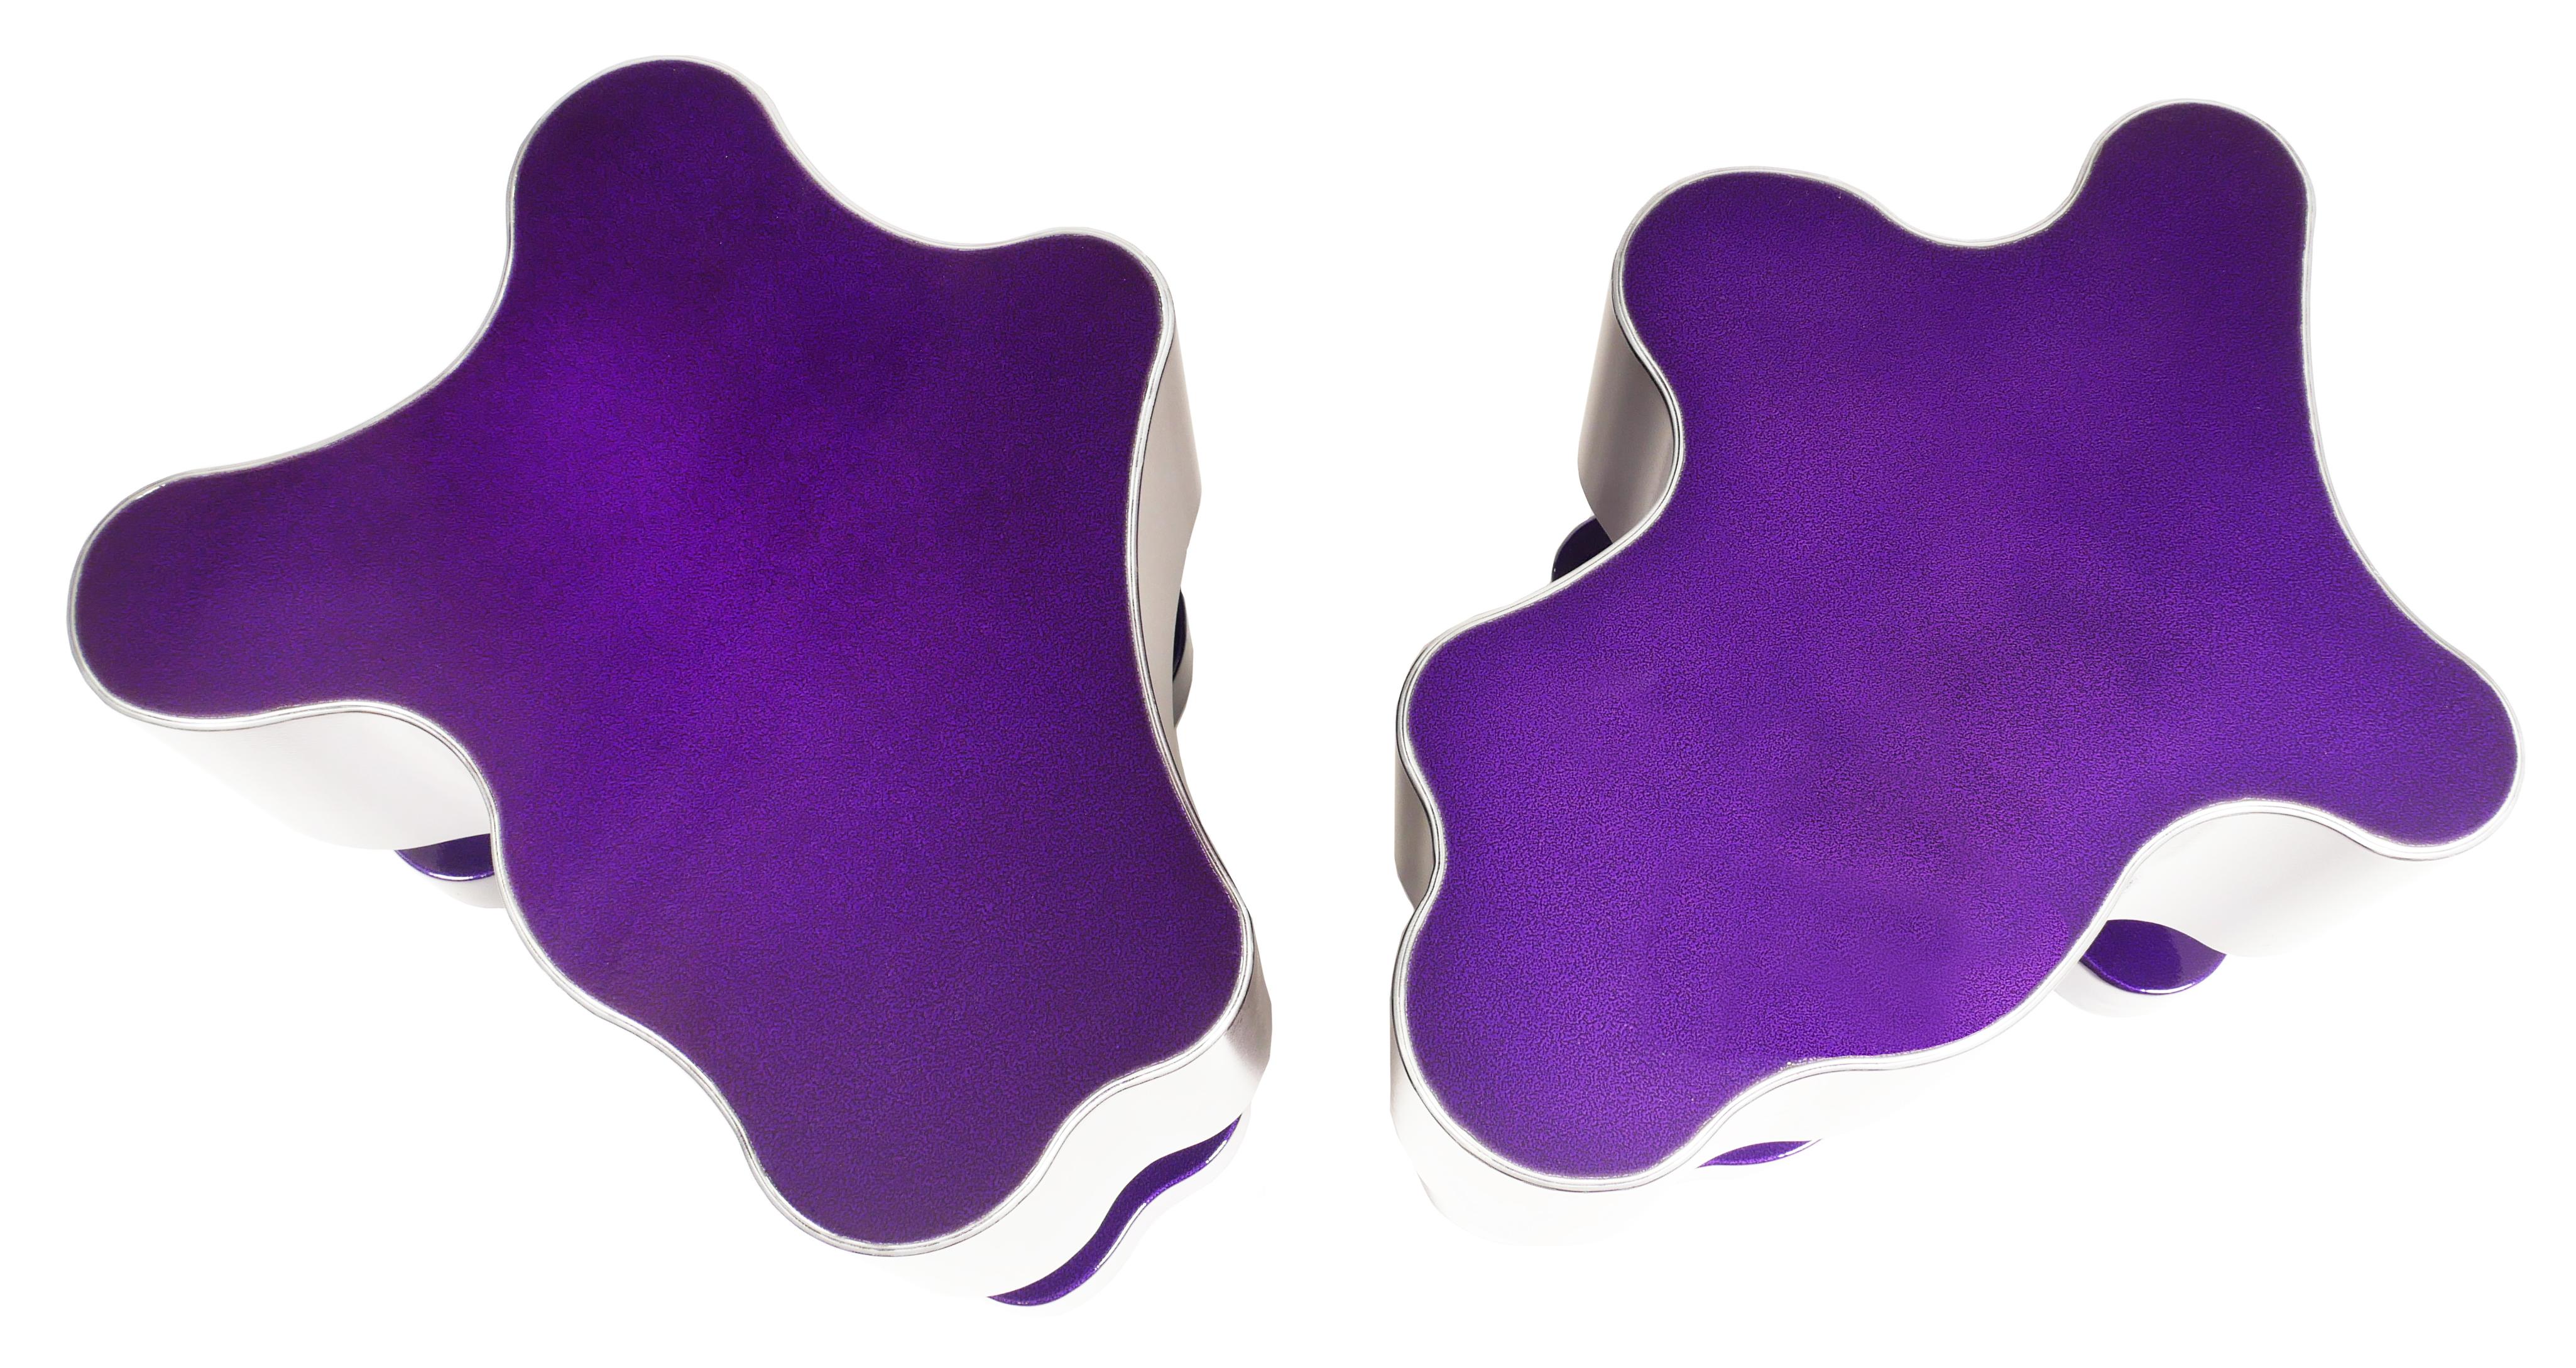 Bert Furnari studio free-form abstract side tables in powder-coated aluminum

Offered for sale is a pair of one-of-a-kind aluminum side tables with a violet powder-coated finish. This pair of unique tables is hand-made in the artist's studio using